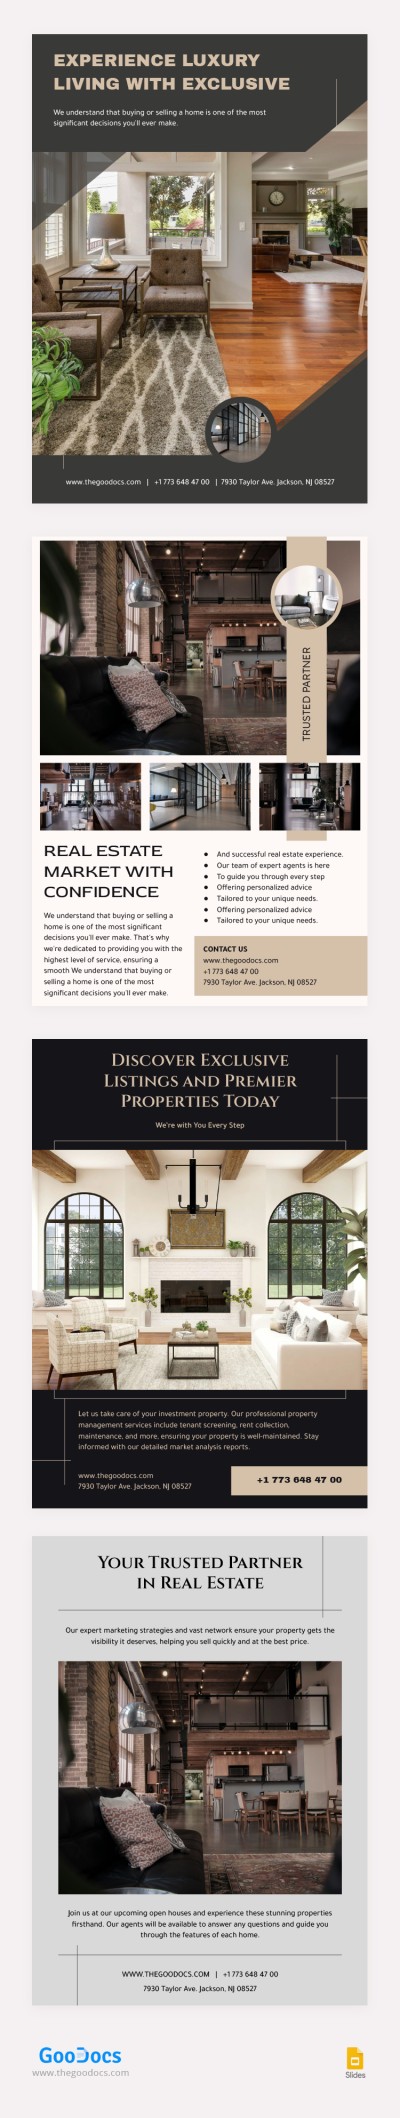 Real Estate Flyers Template